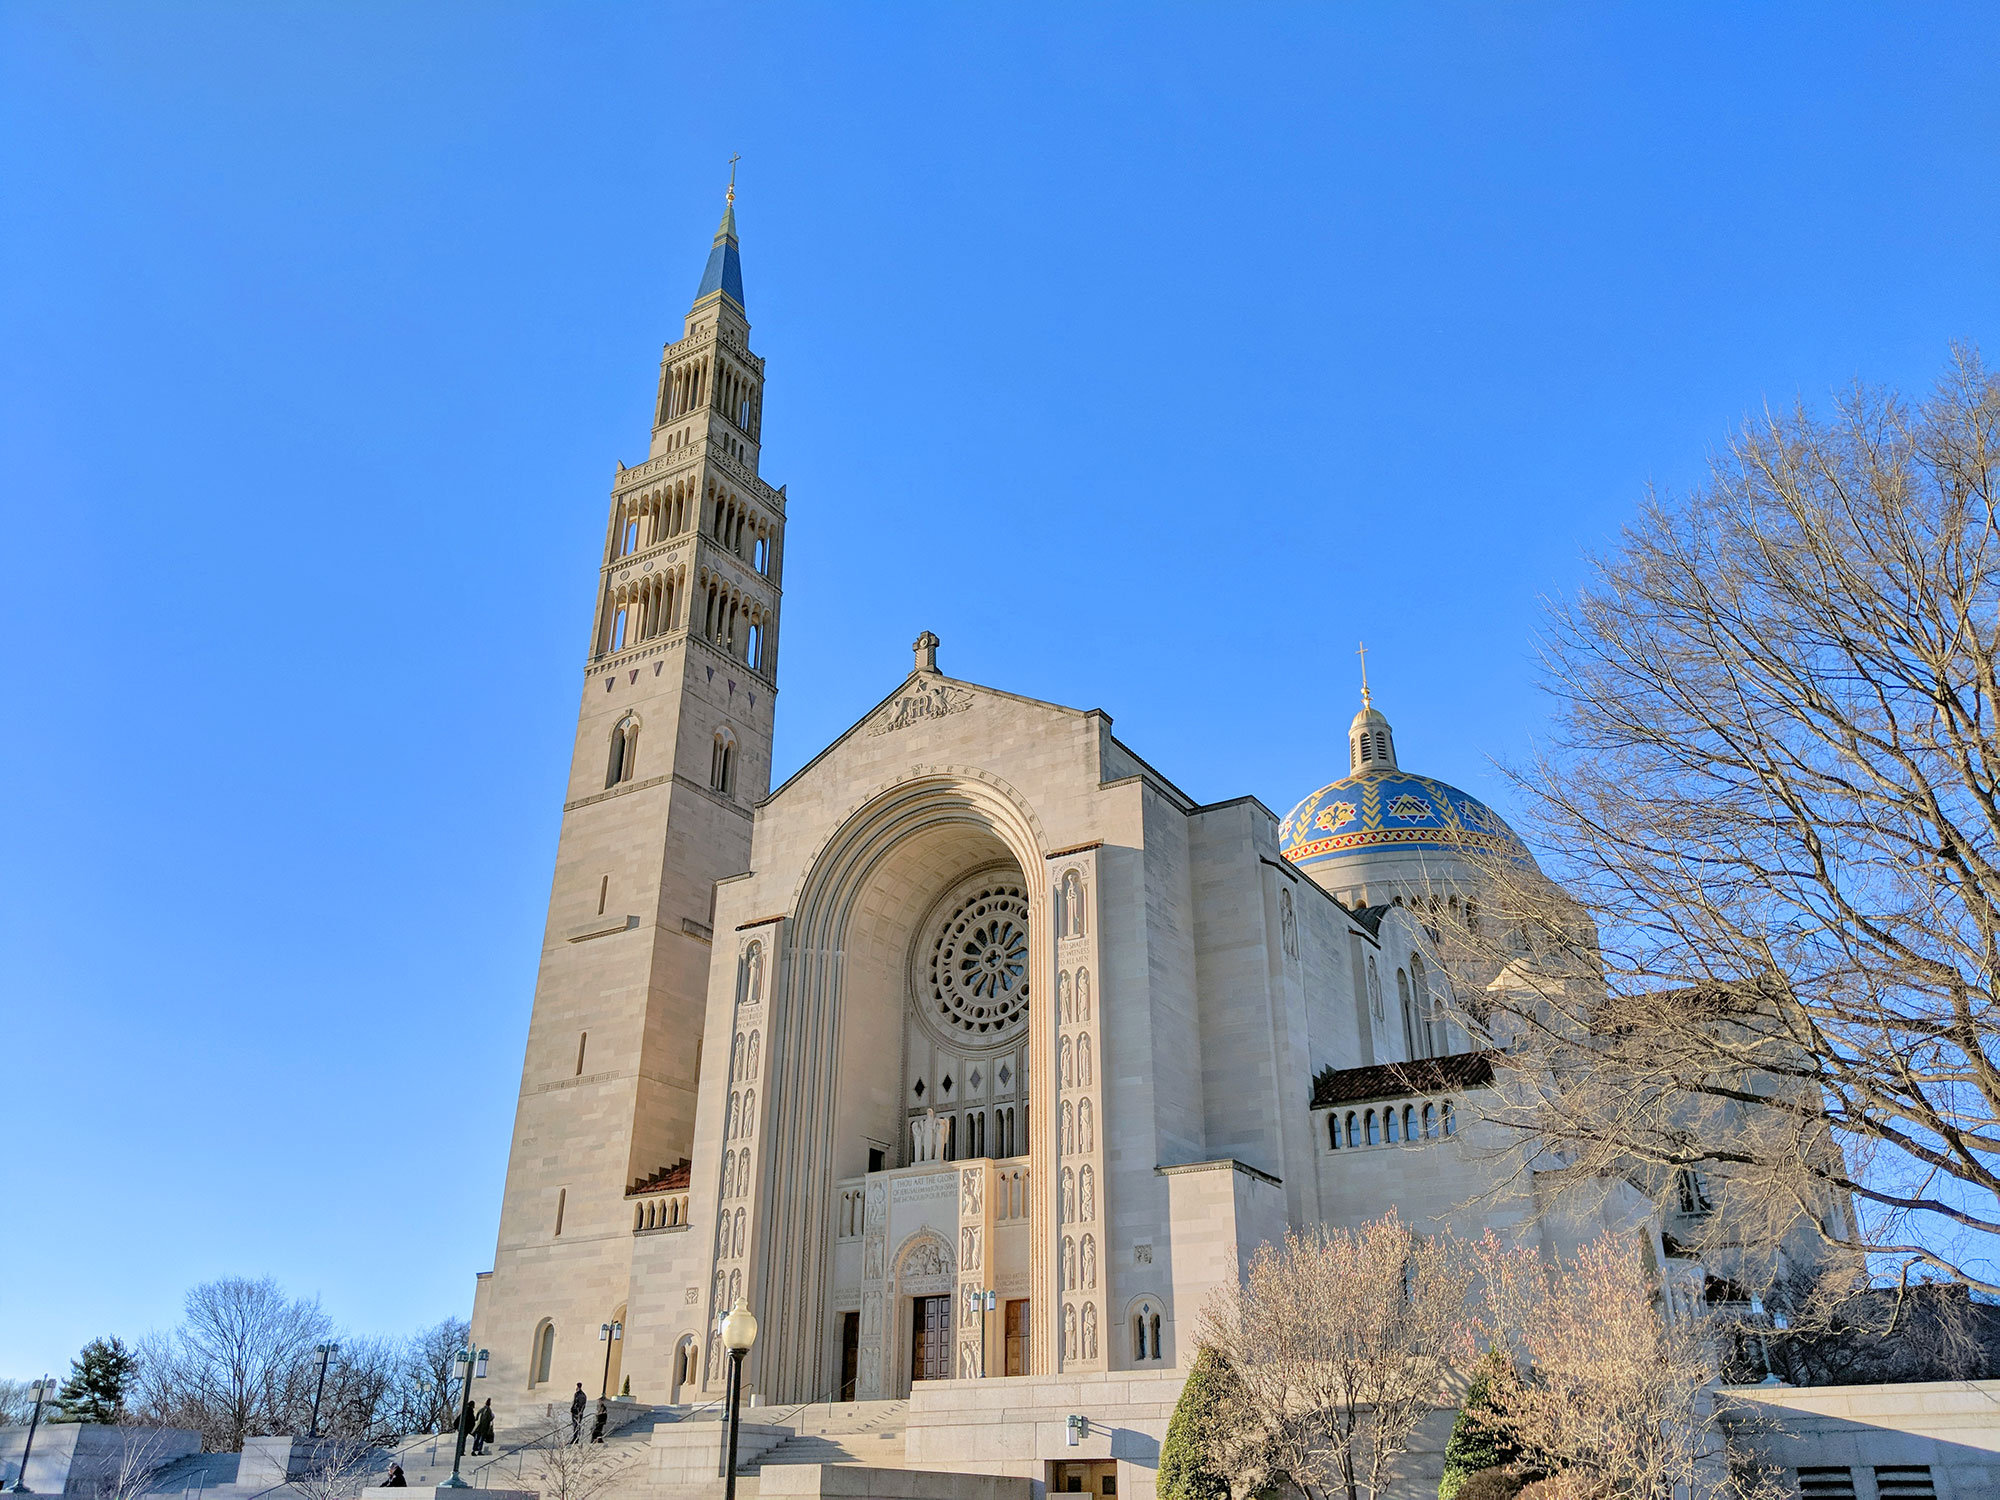 The exterior of the National Shrine of the Immaculate Conception in Washington D.C.